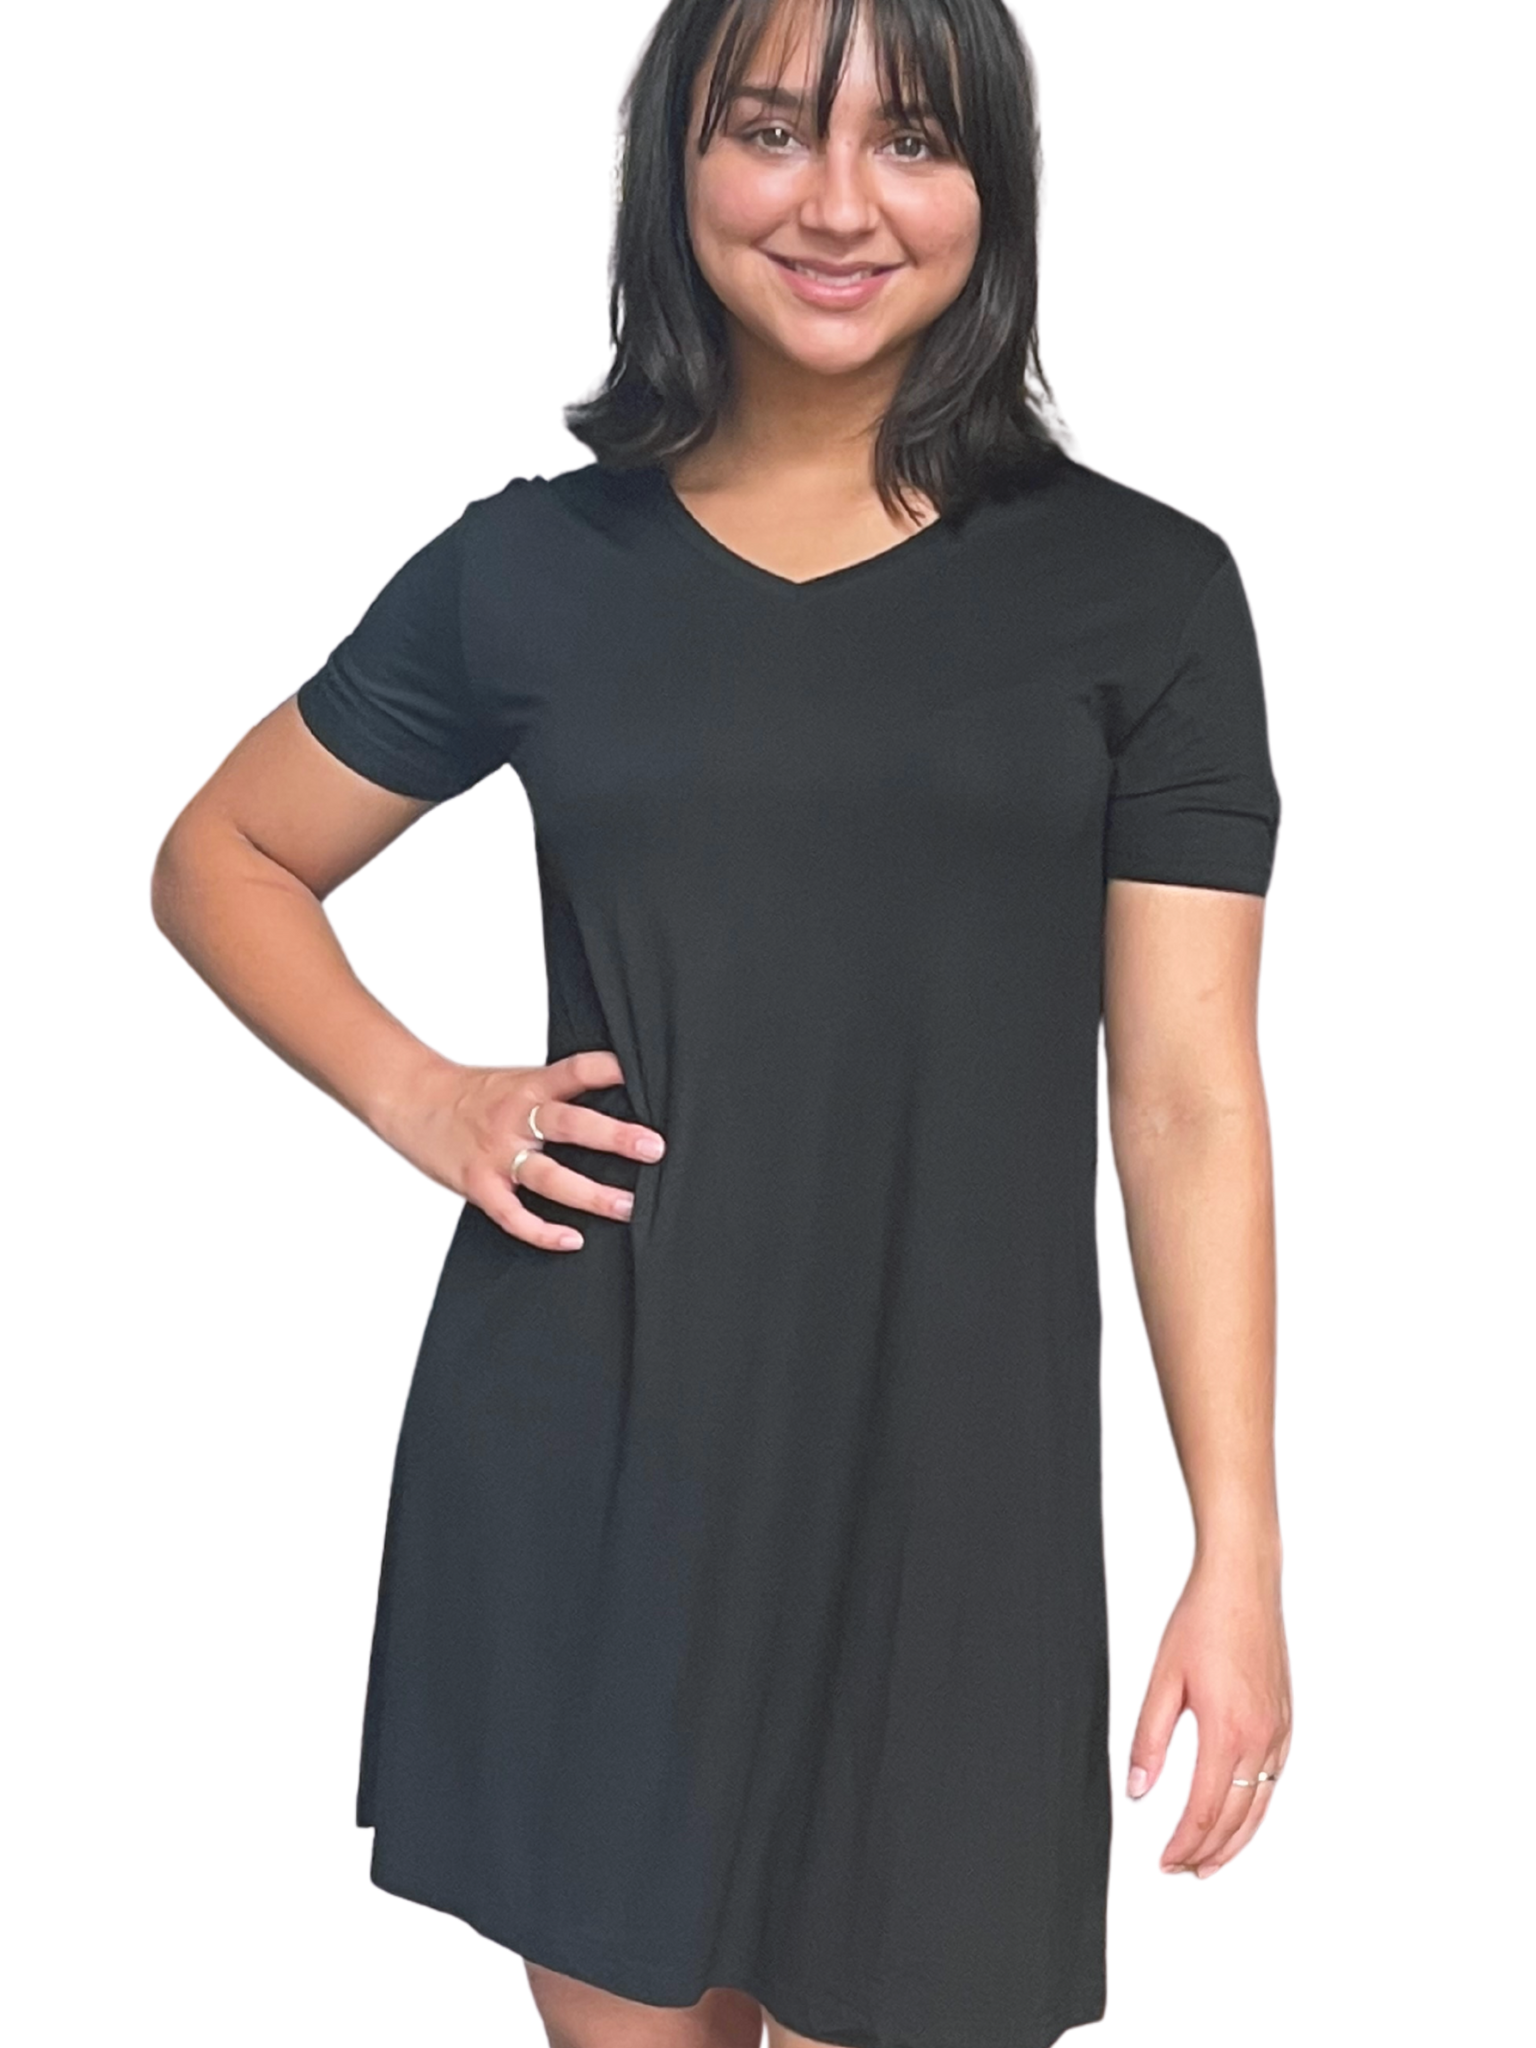 Bamboo Nightshirt/ Nightgown in Black, transparent background